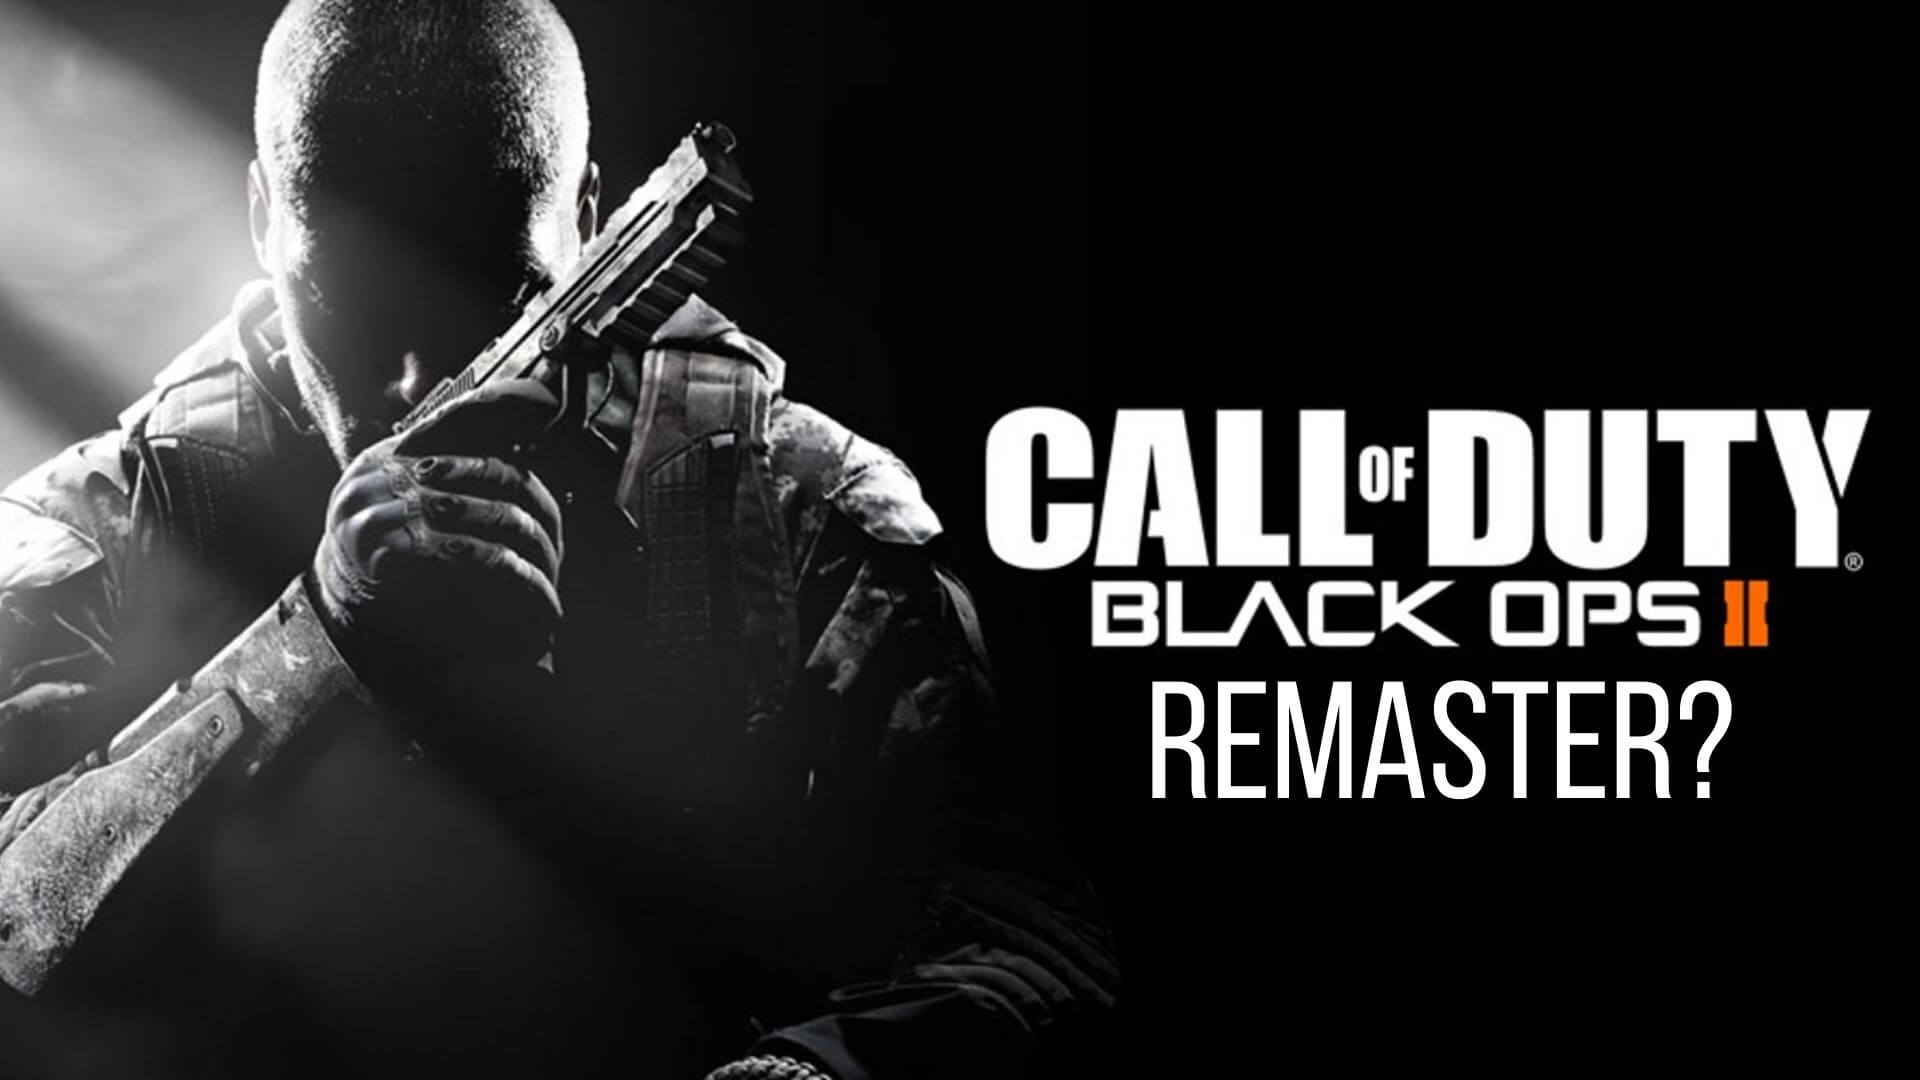 2 different versions of black ops 2?